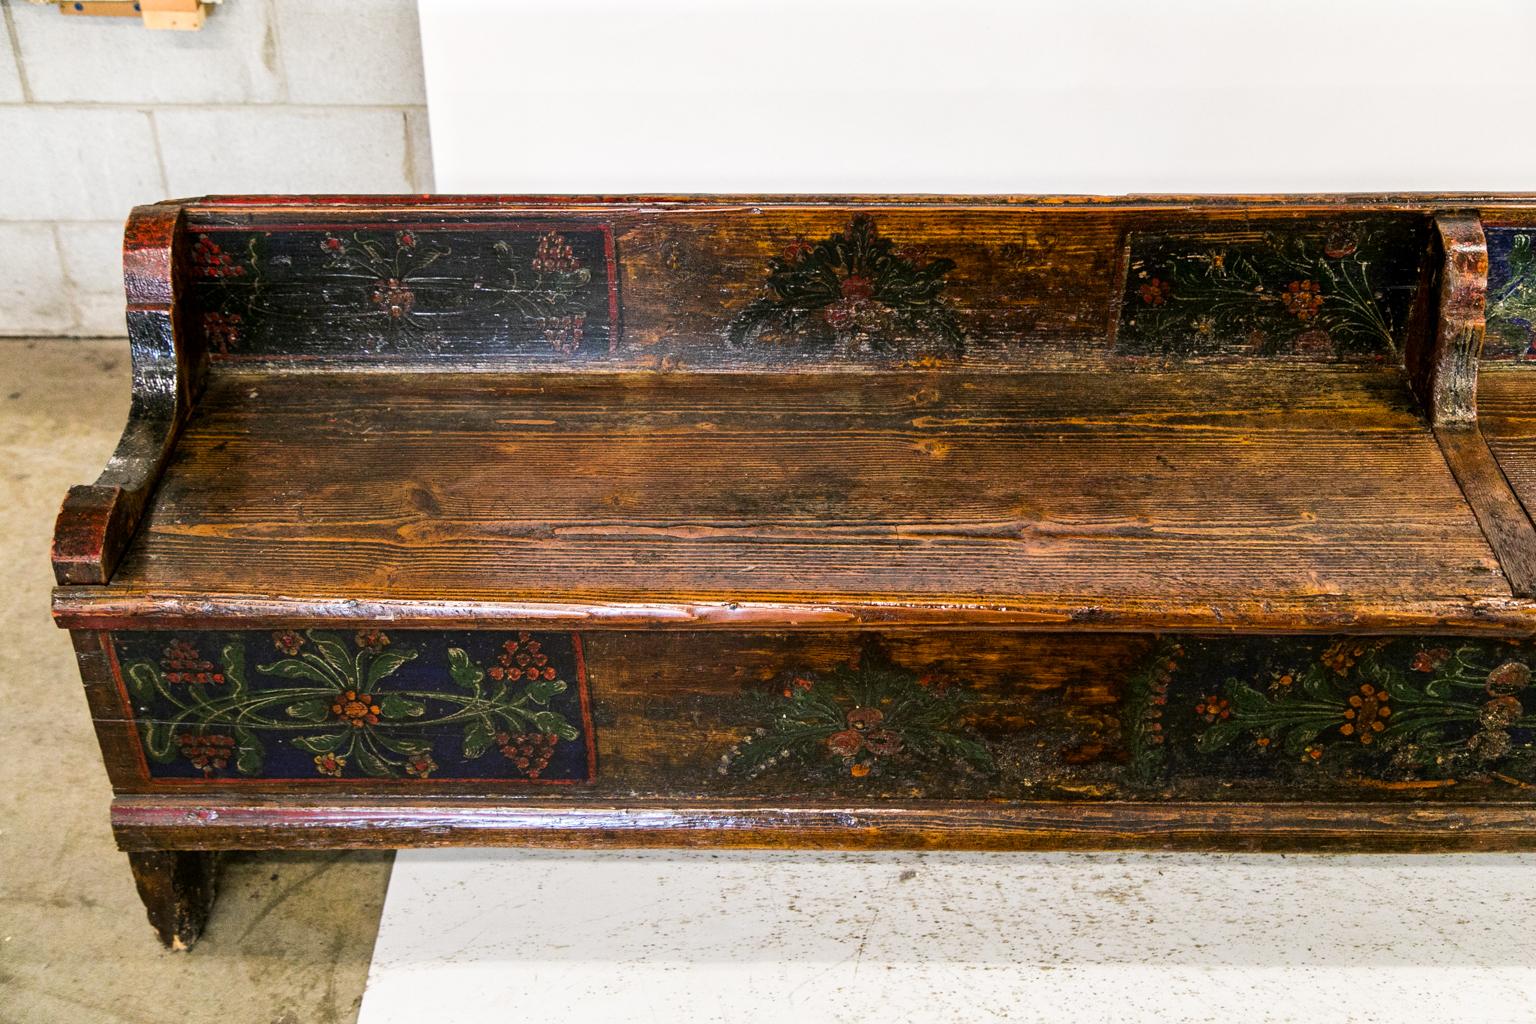 This long painted European bench has floral decoration on the front and backrest. The paint is muted with some wear commensurate with age and use. The backrest is supported by thick shaped brackets on the ends and center. The seats lift up to expose